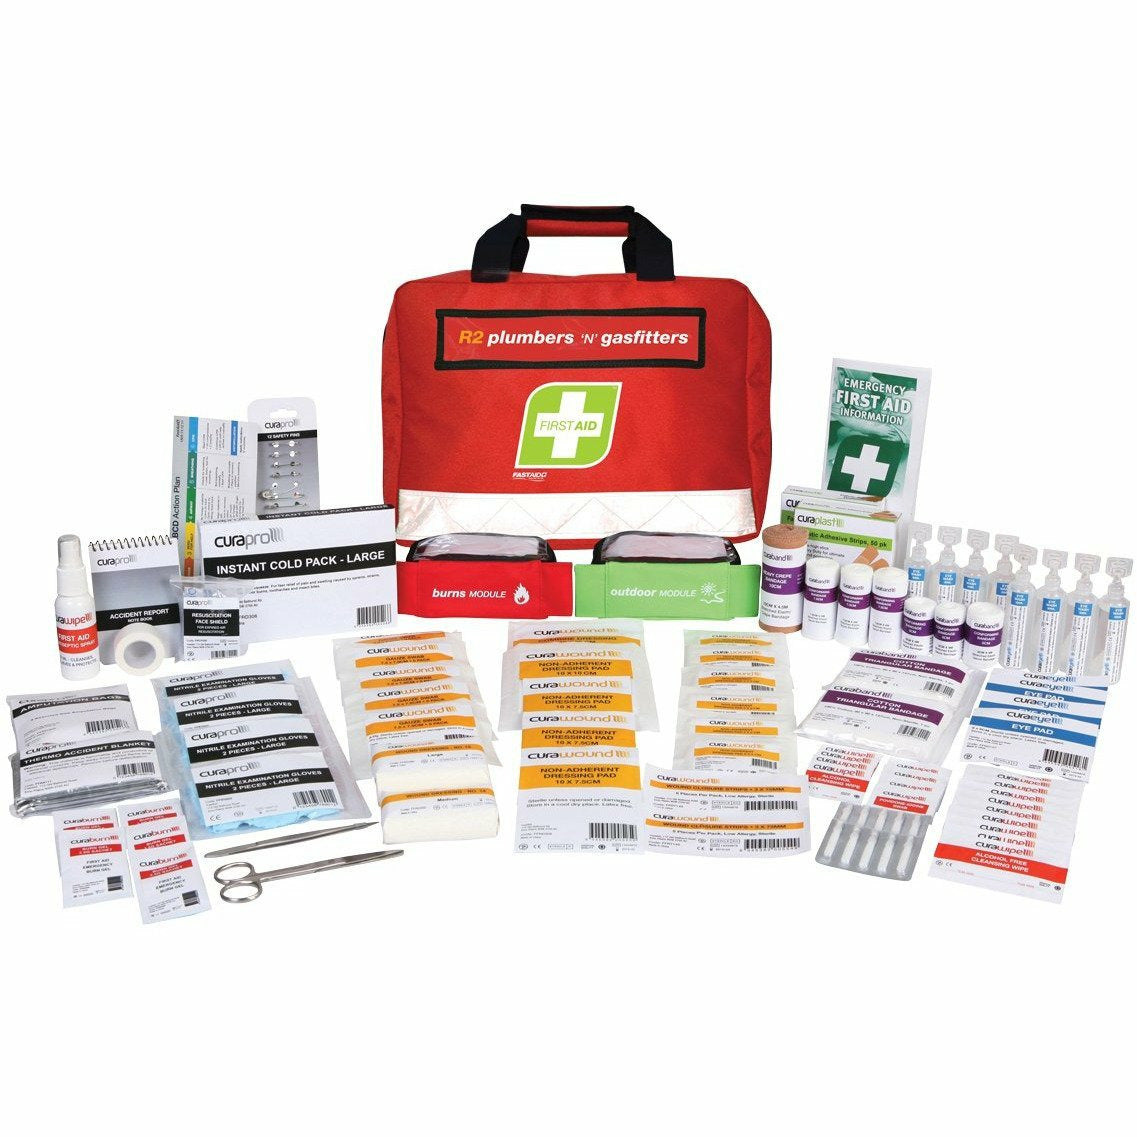 FastAid R2 Plumbers &amp; Gasfitters First Aid Kit - Soft Pack